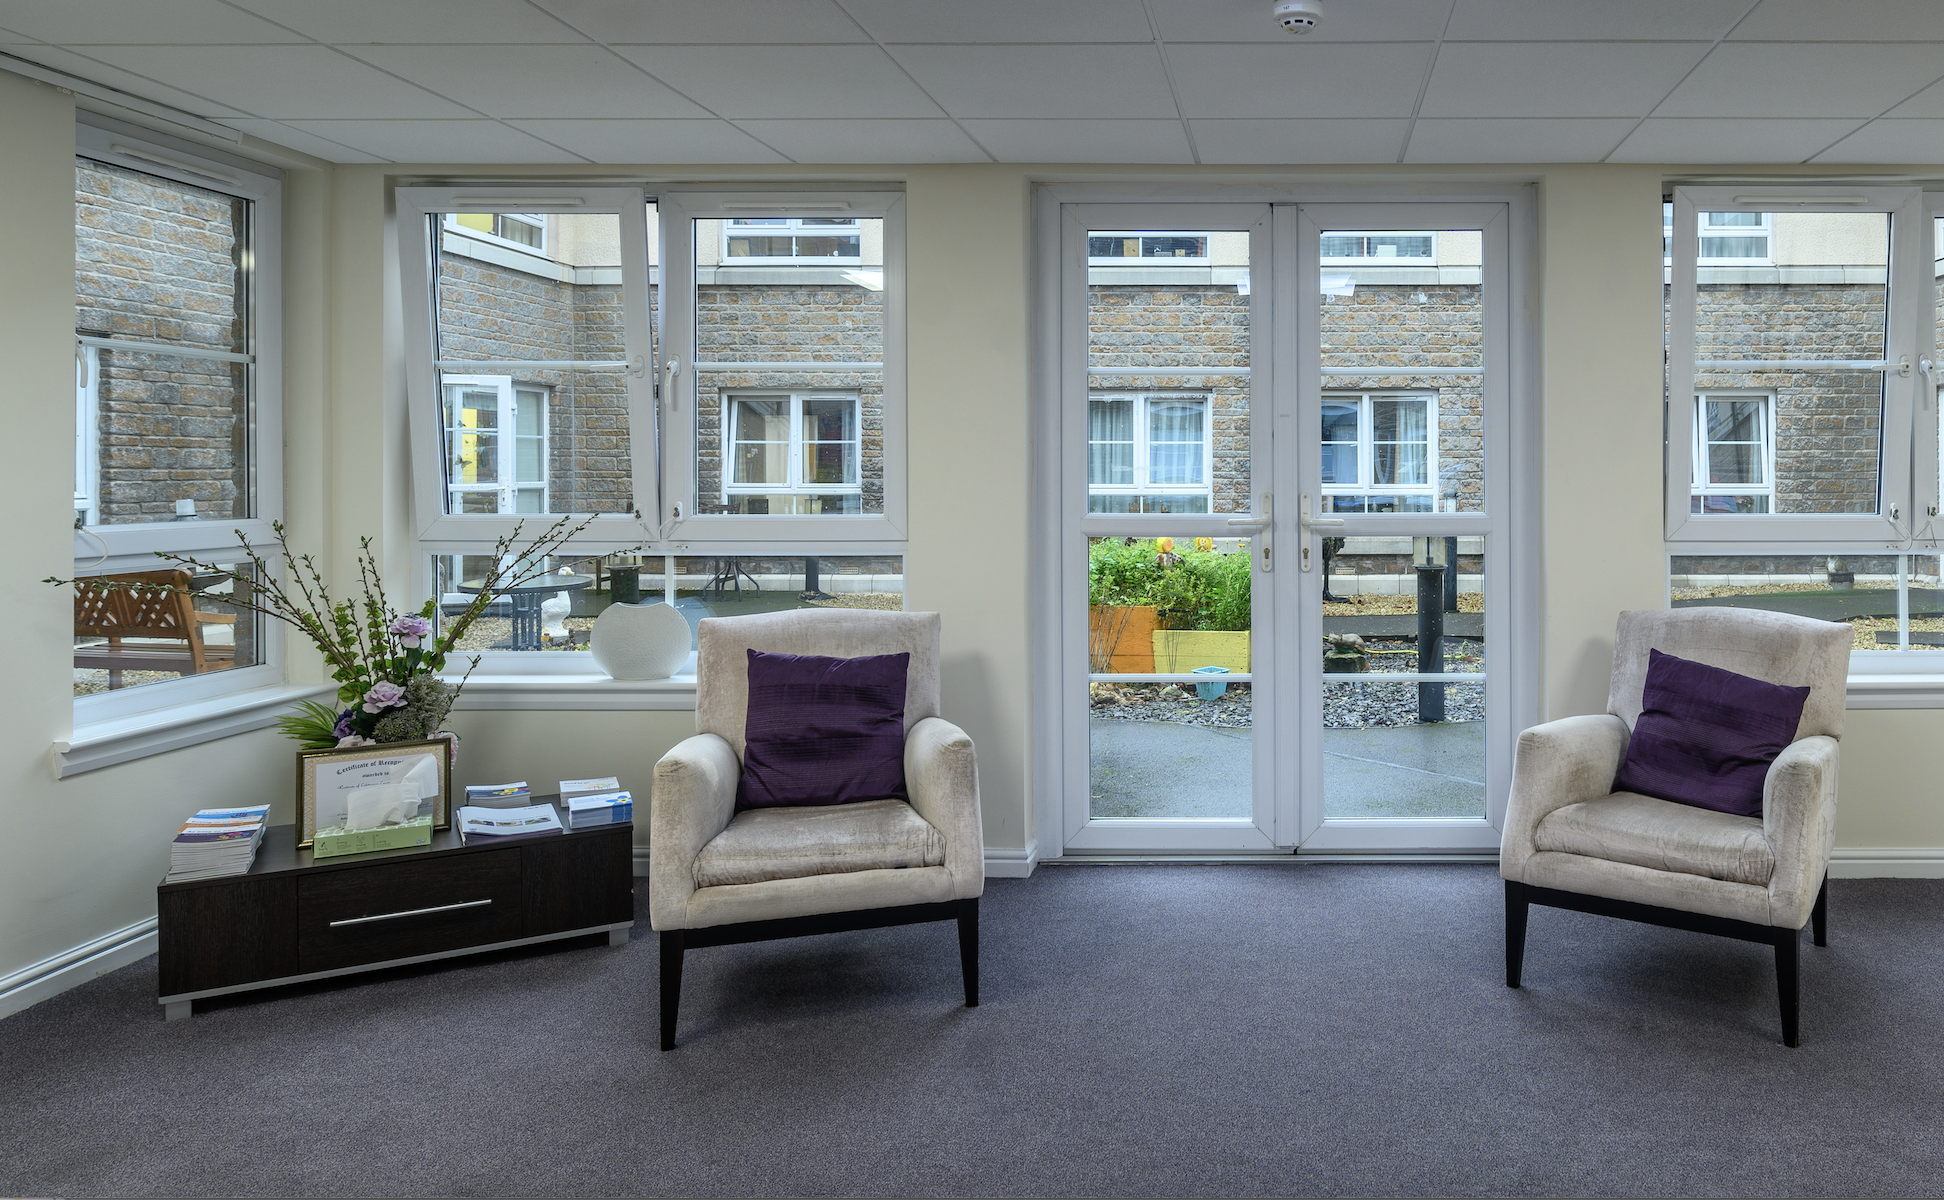 Communal Area of Caledonian Court Care Home in Falkirk, Scotland